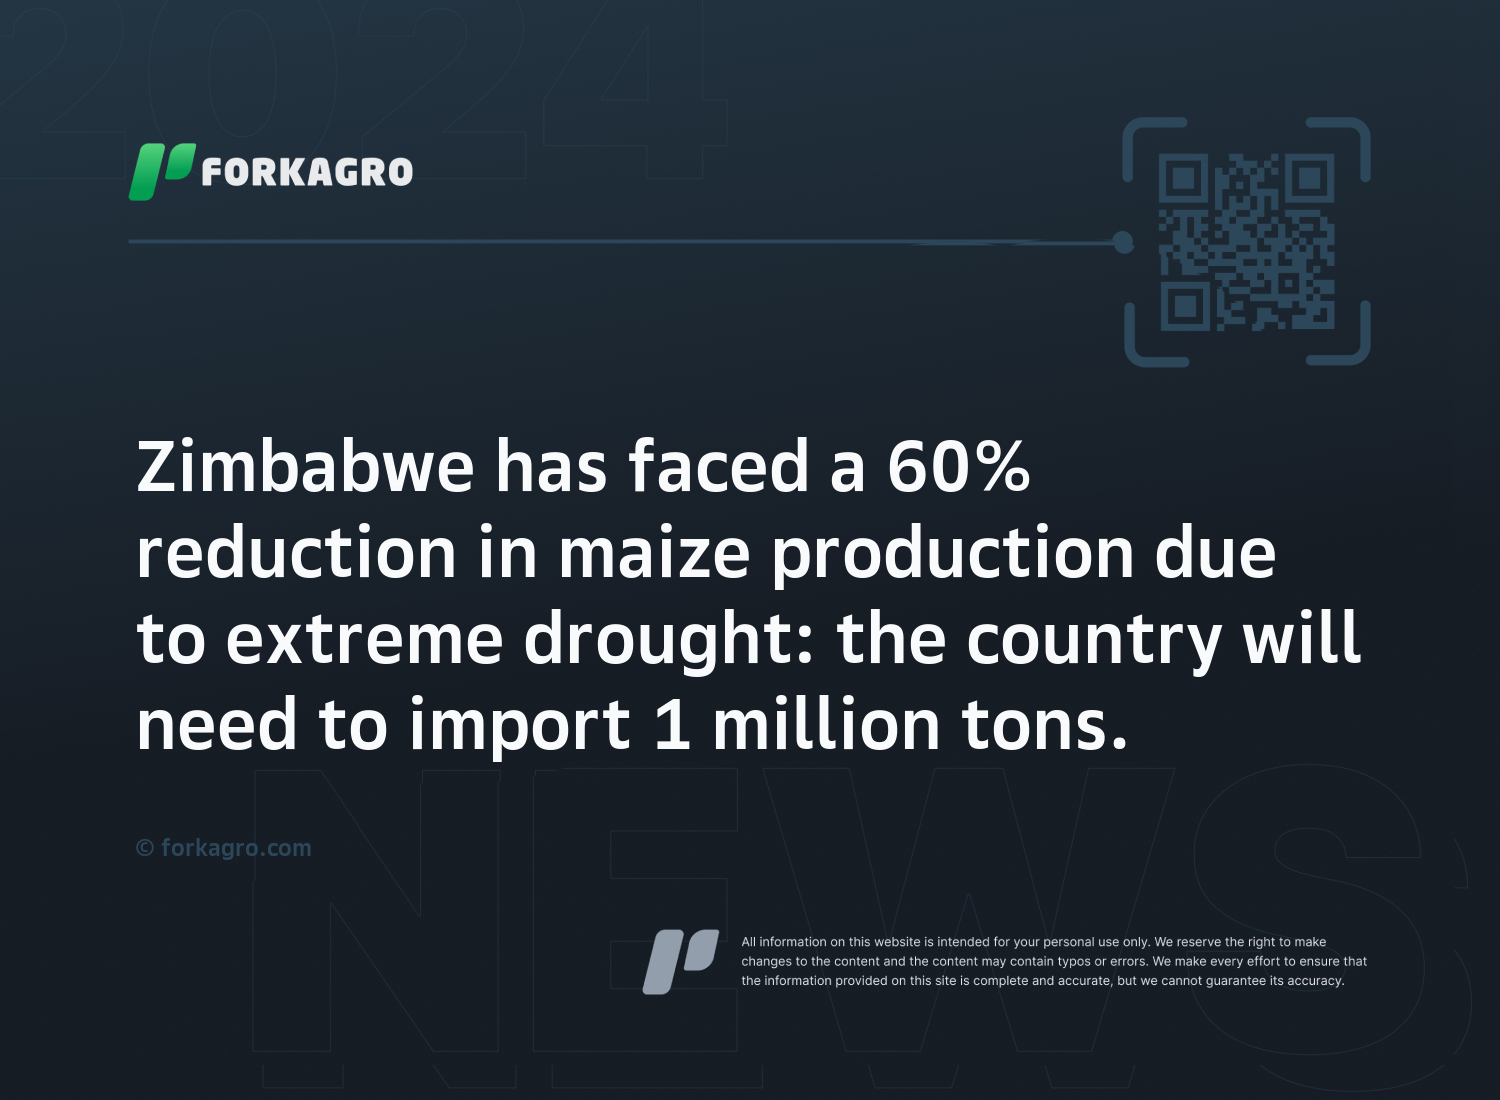 Zimbabwe has faced a 60% reduction in maize production due to extreme drought: the country will need to import 1 million tons.